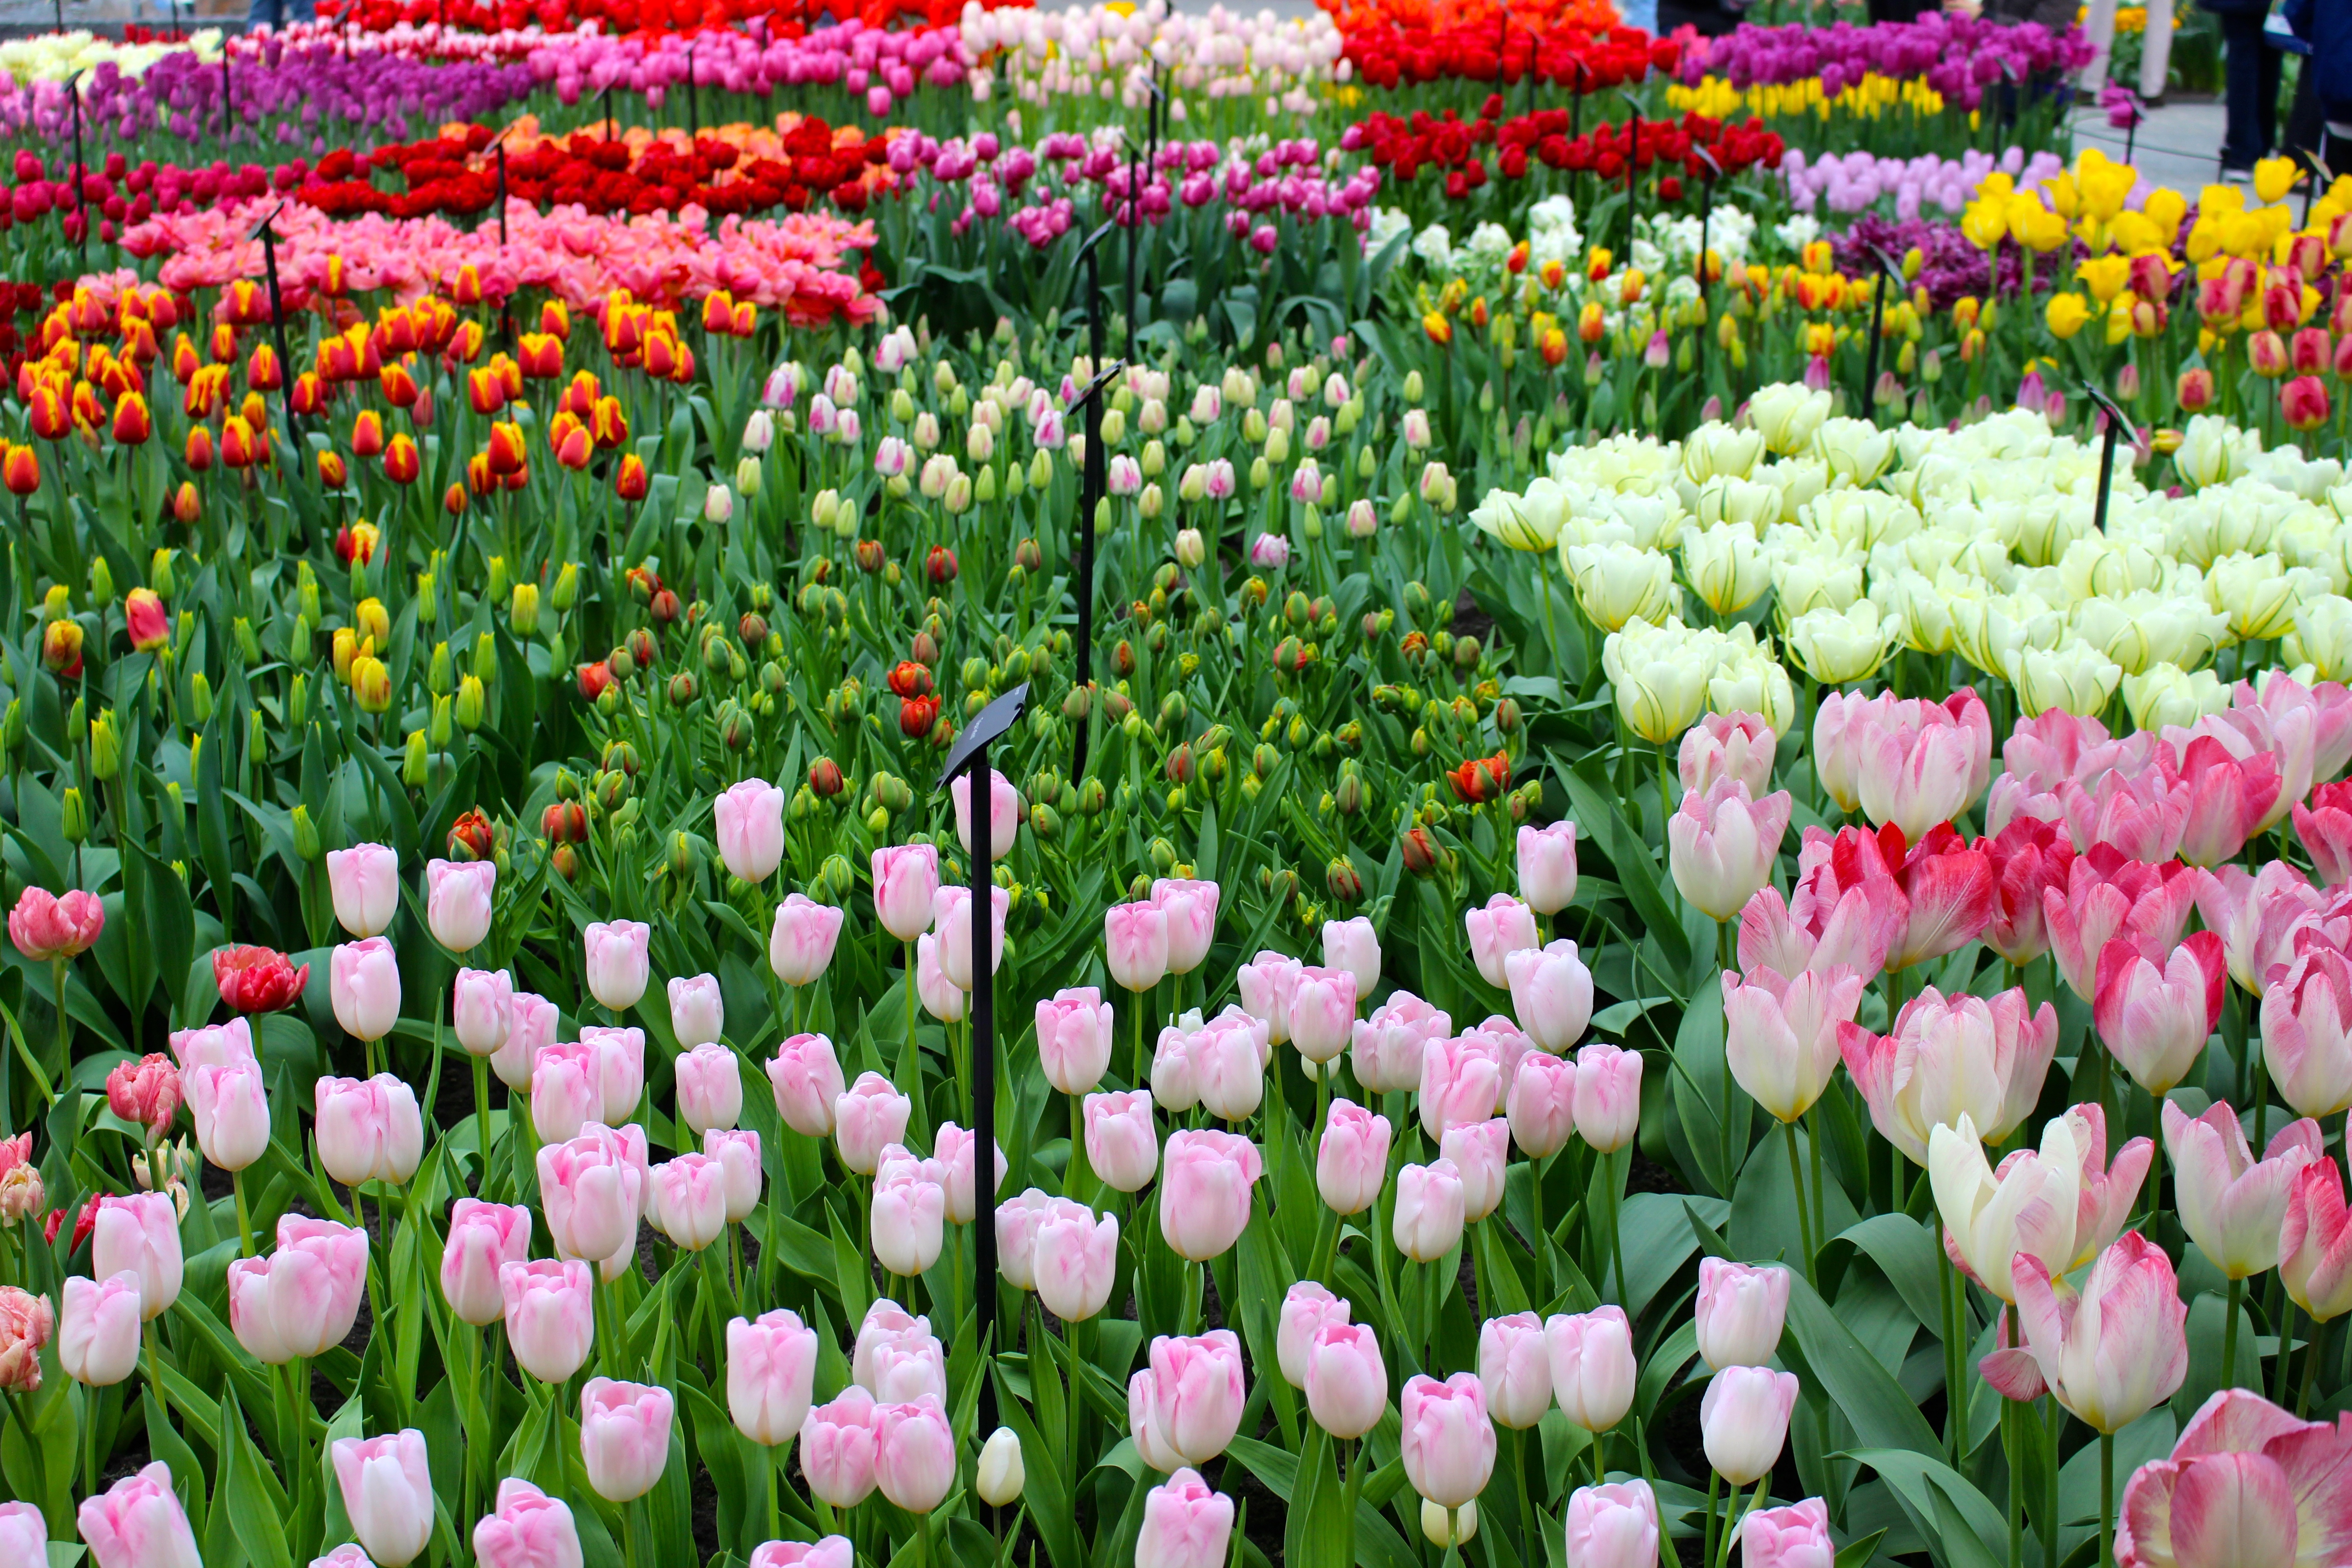 Rows and rows of tulips at the indoor gardens in Keukenhof Holland, the Land of Tulips